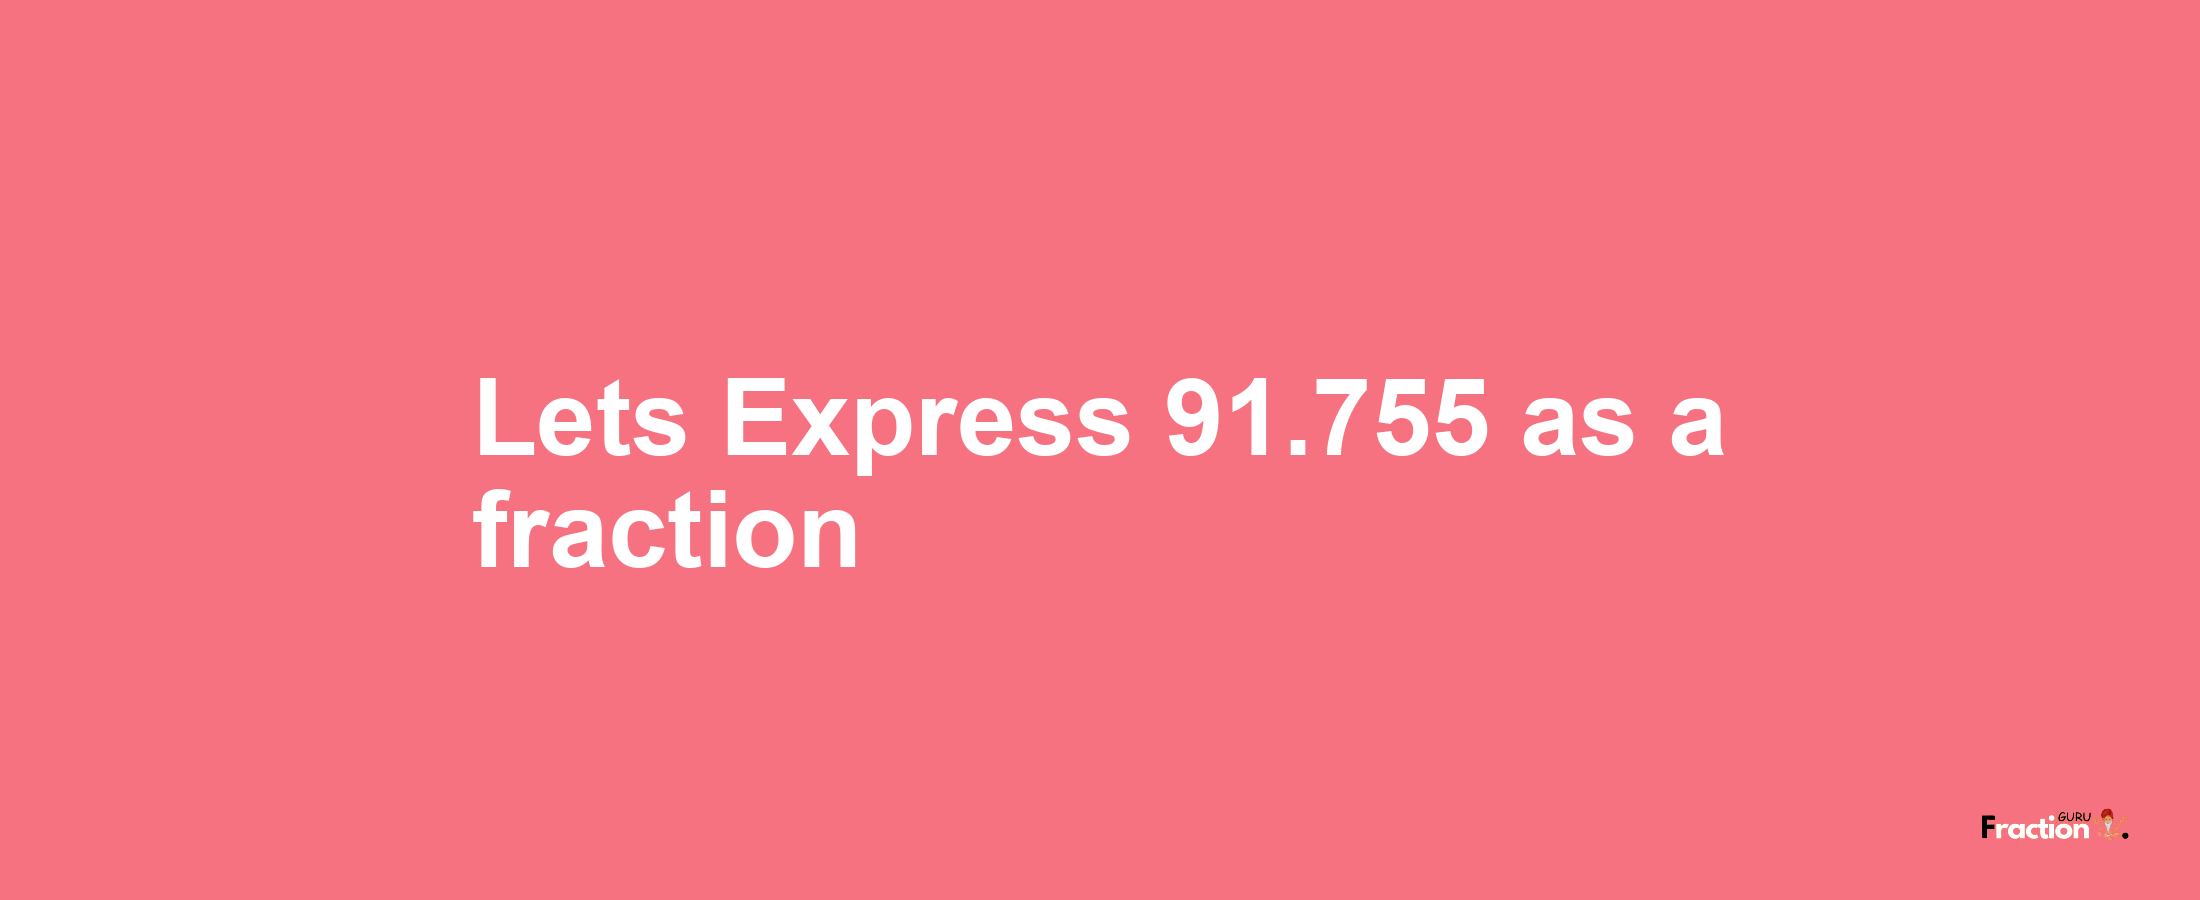 Lets Express 91.755 as afraction